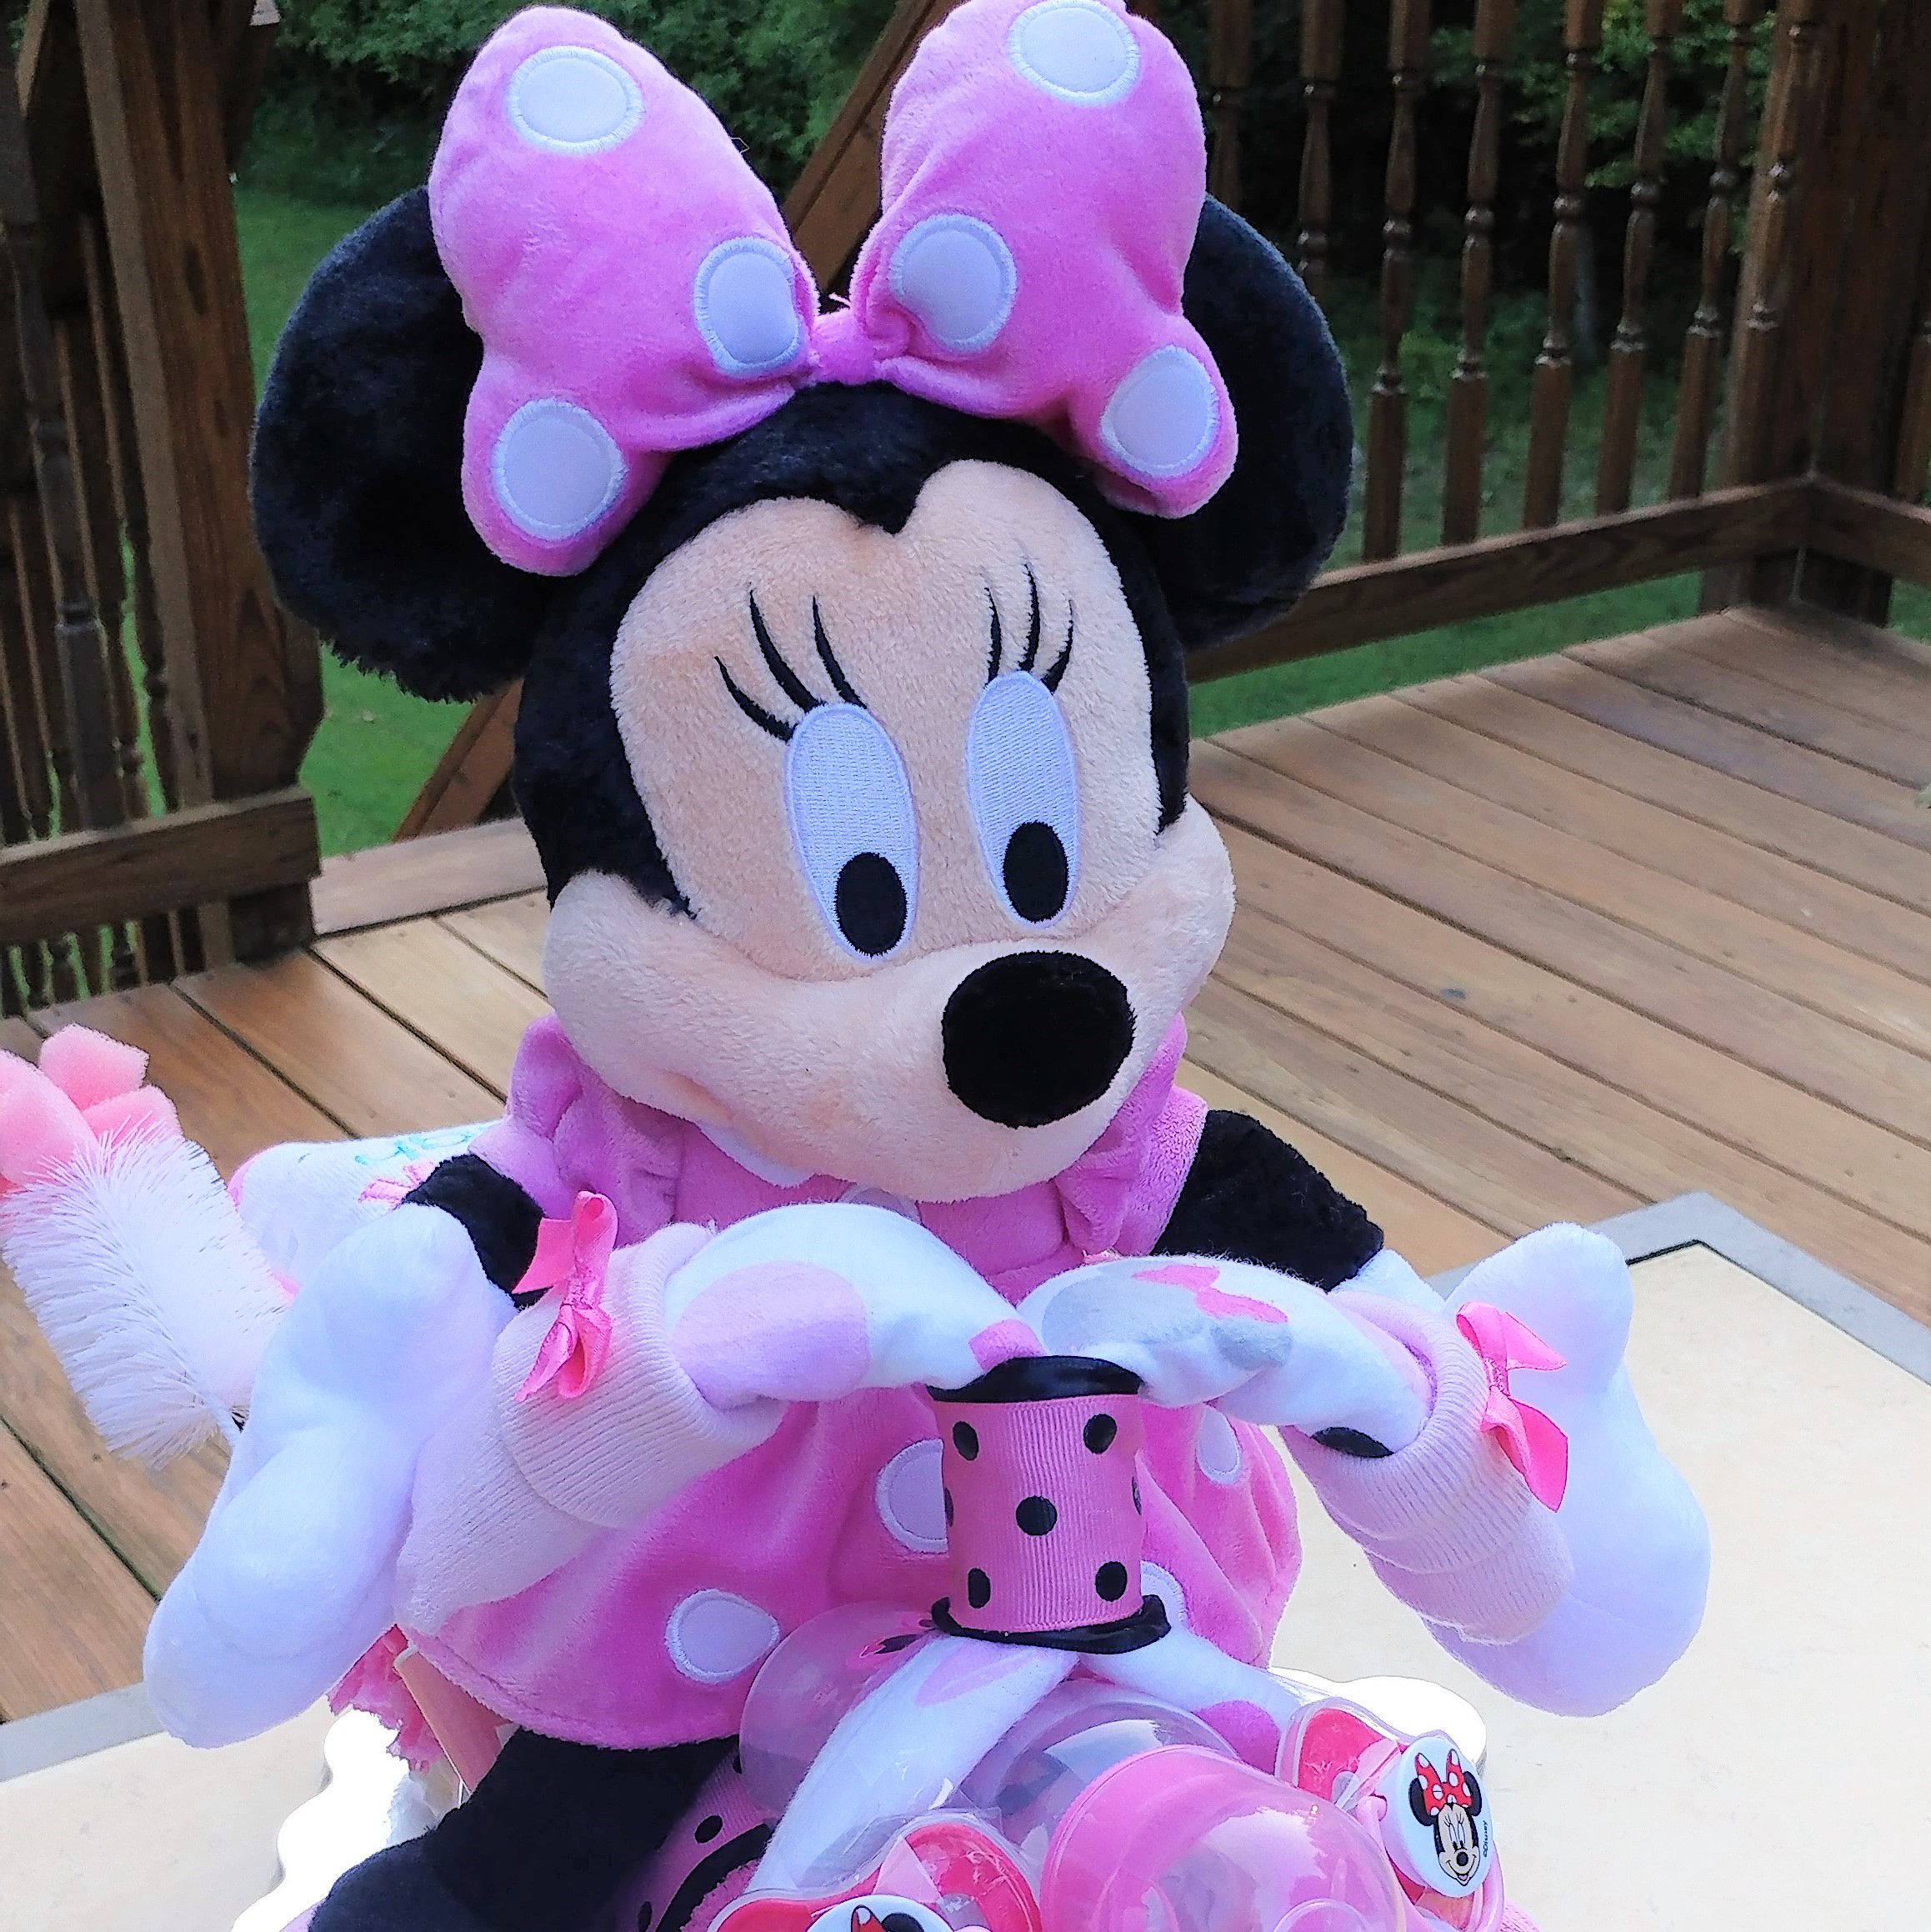 Cute Minnie Mouse Motorcycle Diaper Cake – Girls Pink and White